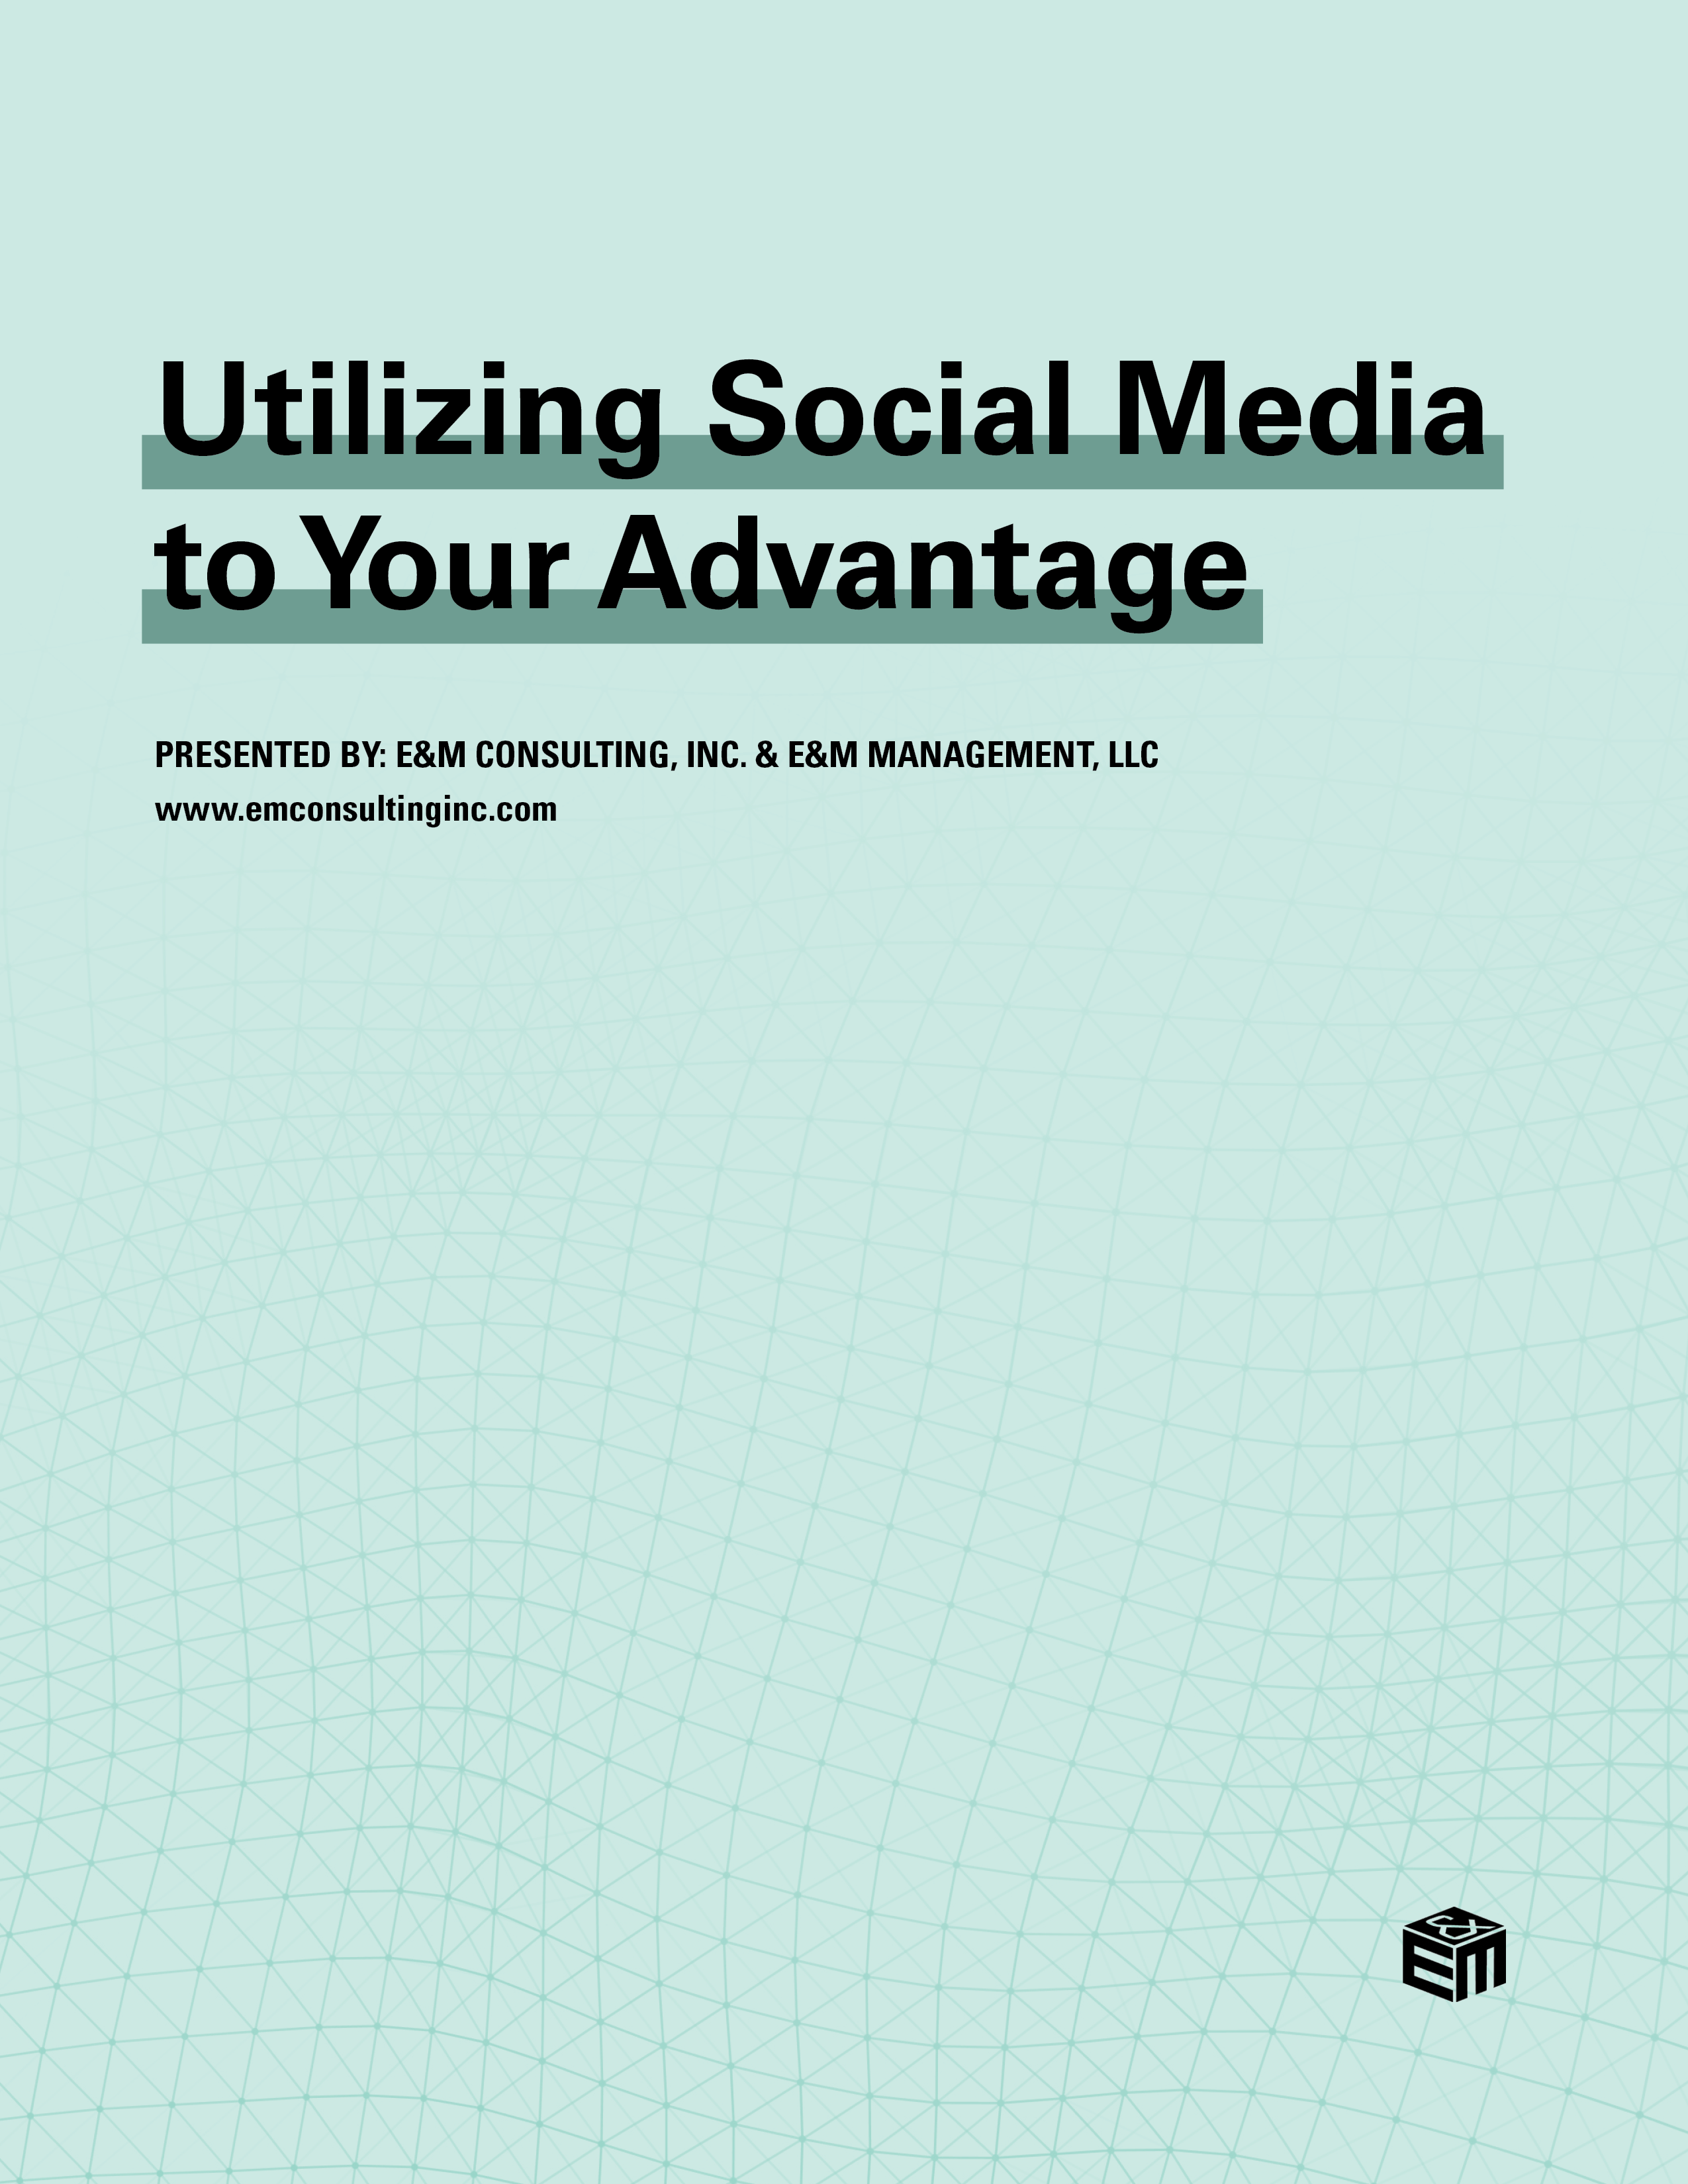 Green warped checkbox pattern for Utilizing Social Media to Your Advantage